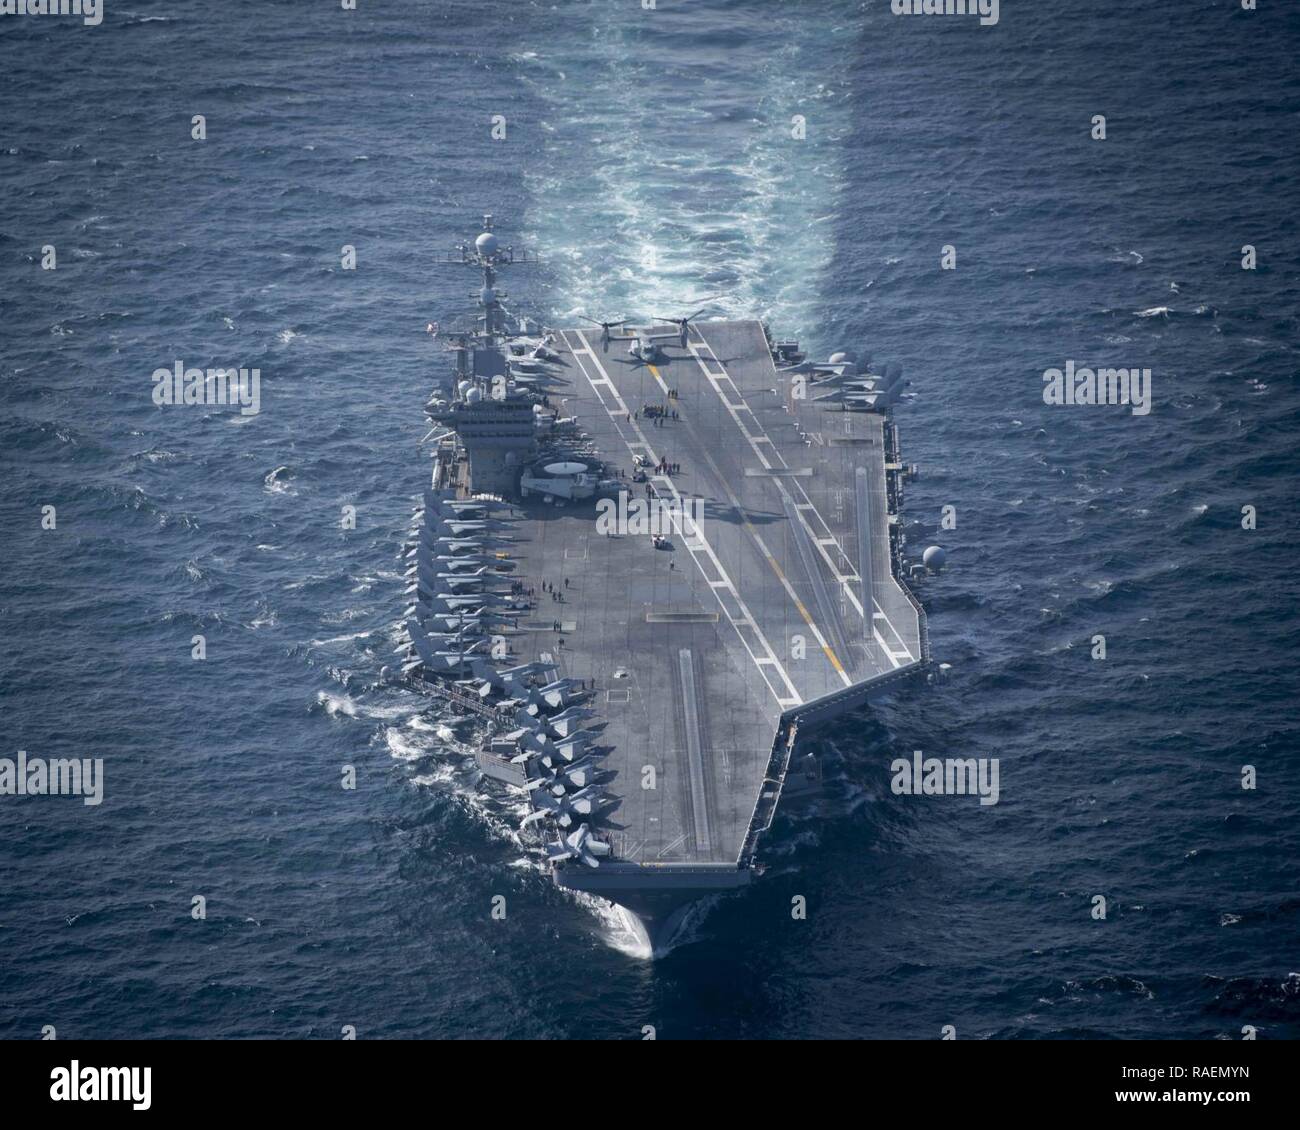 The aircraft carrier USS John C. Stennis (CVN 74) steams through the Arabian Sea, Dec. 14, 2018. The John C. Stennis Carrier Strike Group, Essex Amphibious Ready Group, and 13th Marine Expeditionary Unit are conducting integrated operations in the Arabian Sea to ensure stability and security in the Central Region, connecting the Mediterranean and the Pacific through the western Indian Ocean and three strategic choke points. Stock Photo